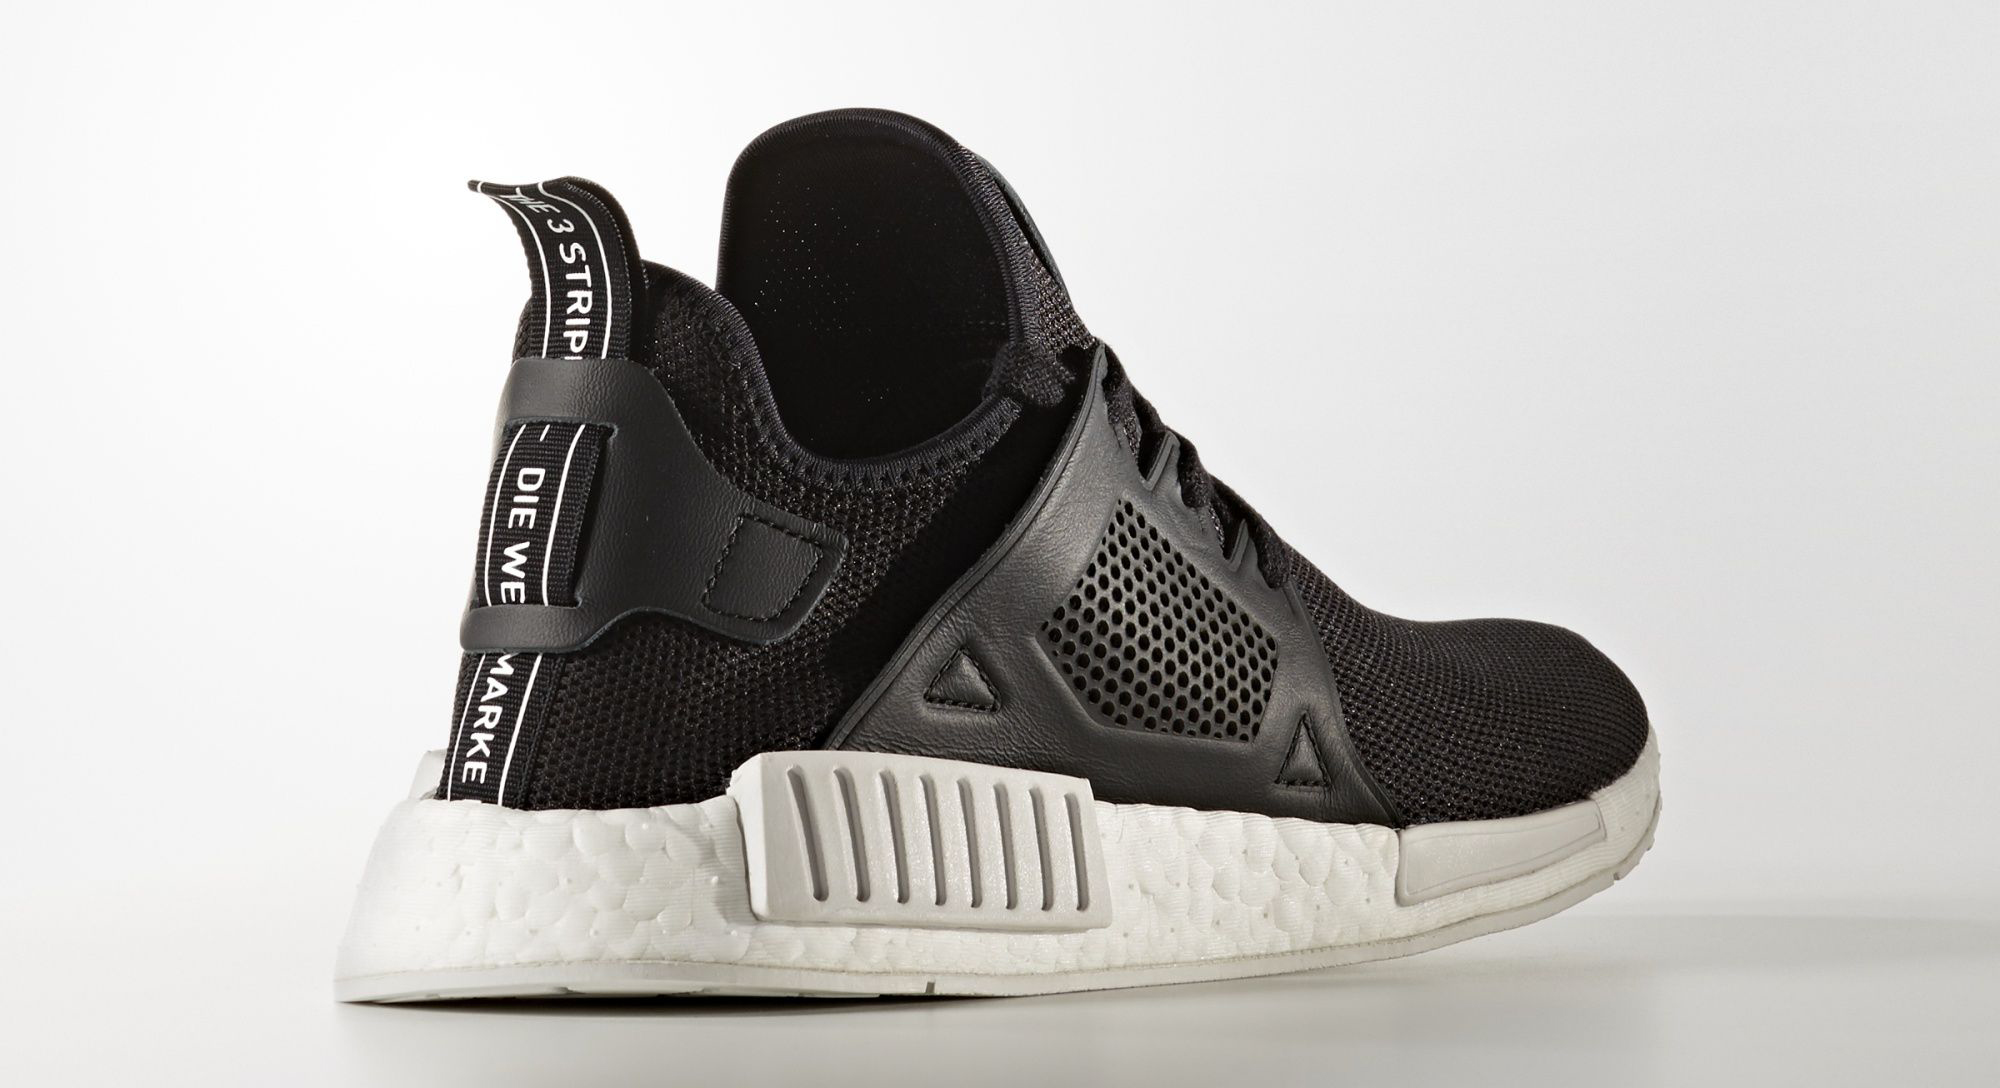 adidas-nmd_xr1-core-black-leather-cage-1